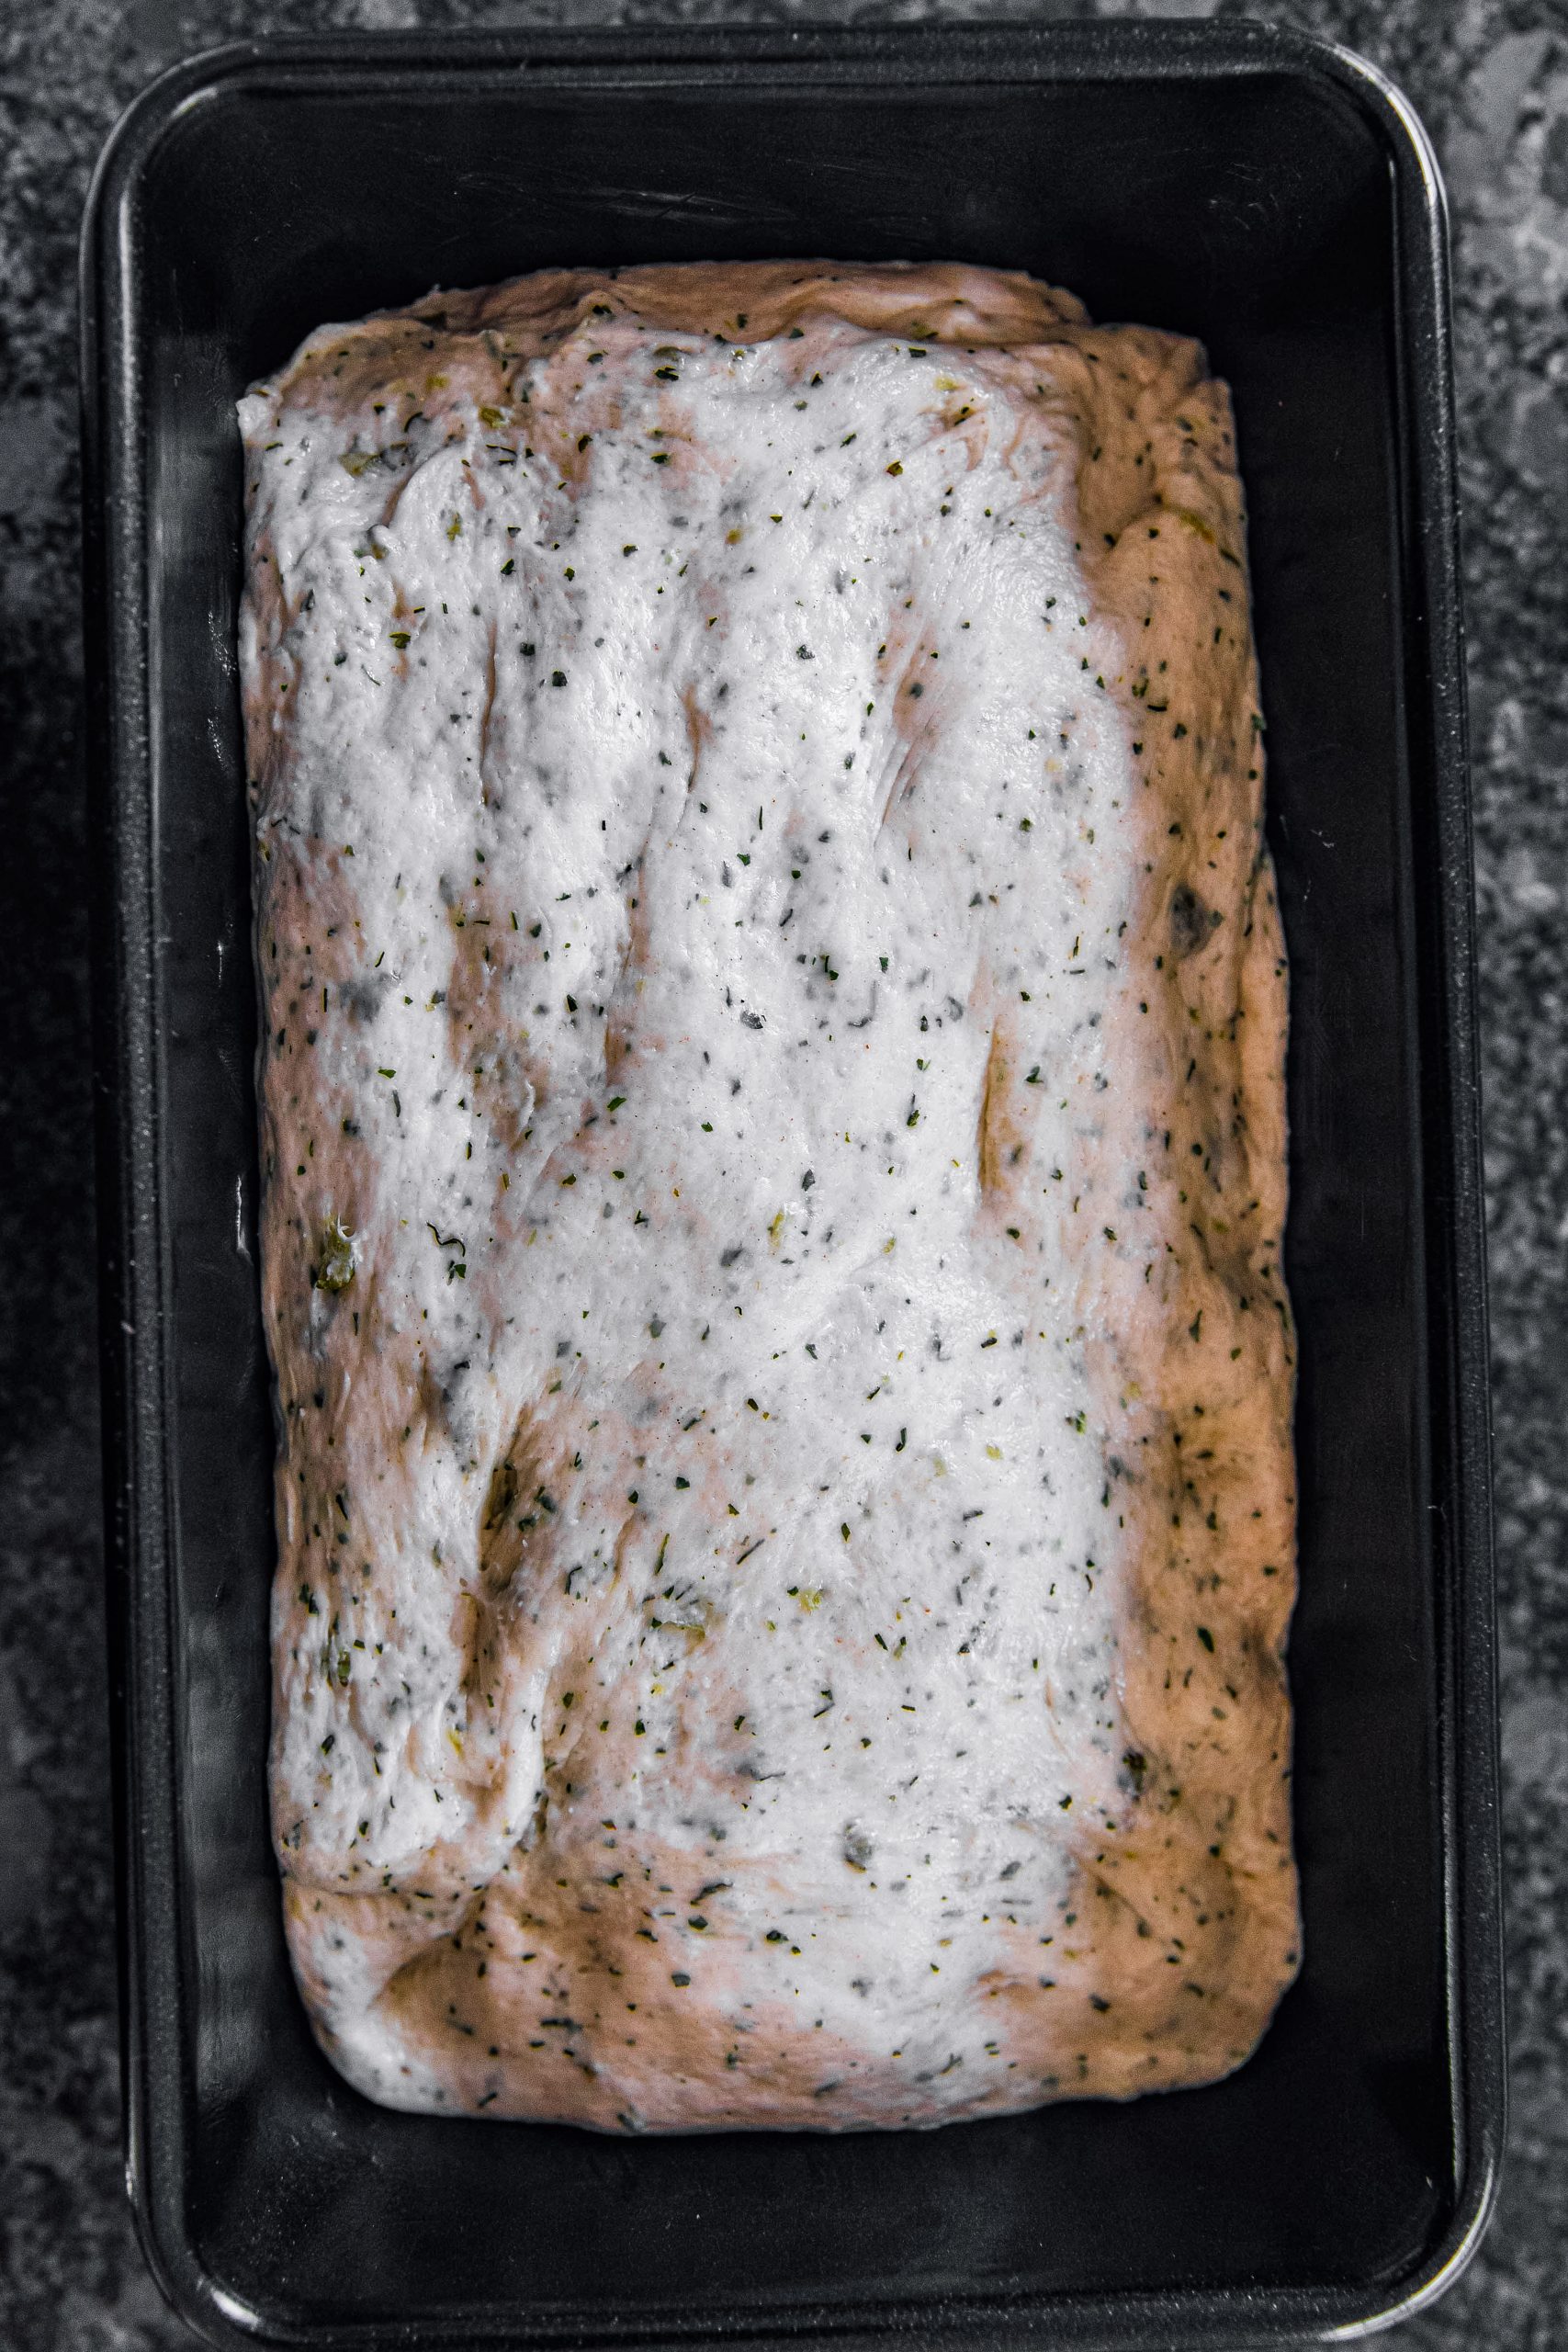 You will want to use the white bread, medium crust setting and bake until your Dill Pickle Bread is golden.